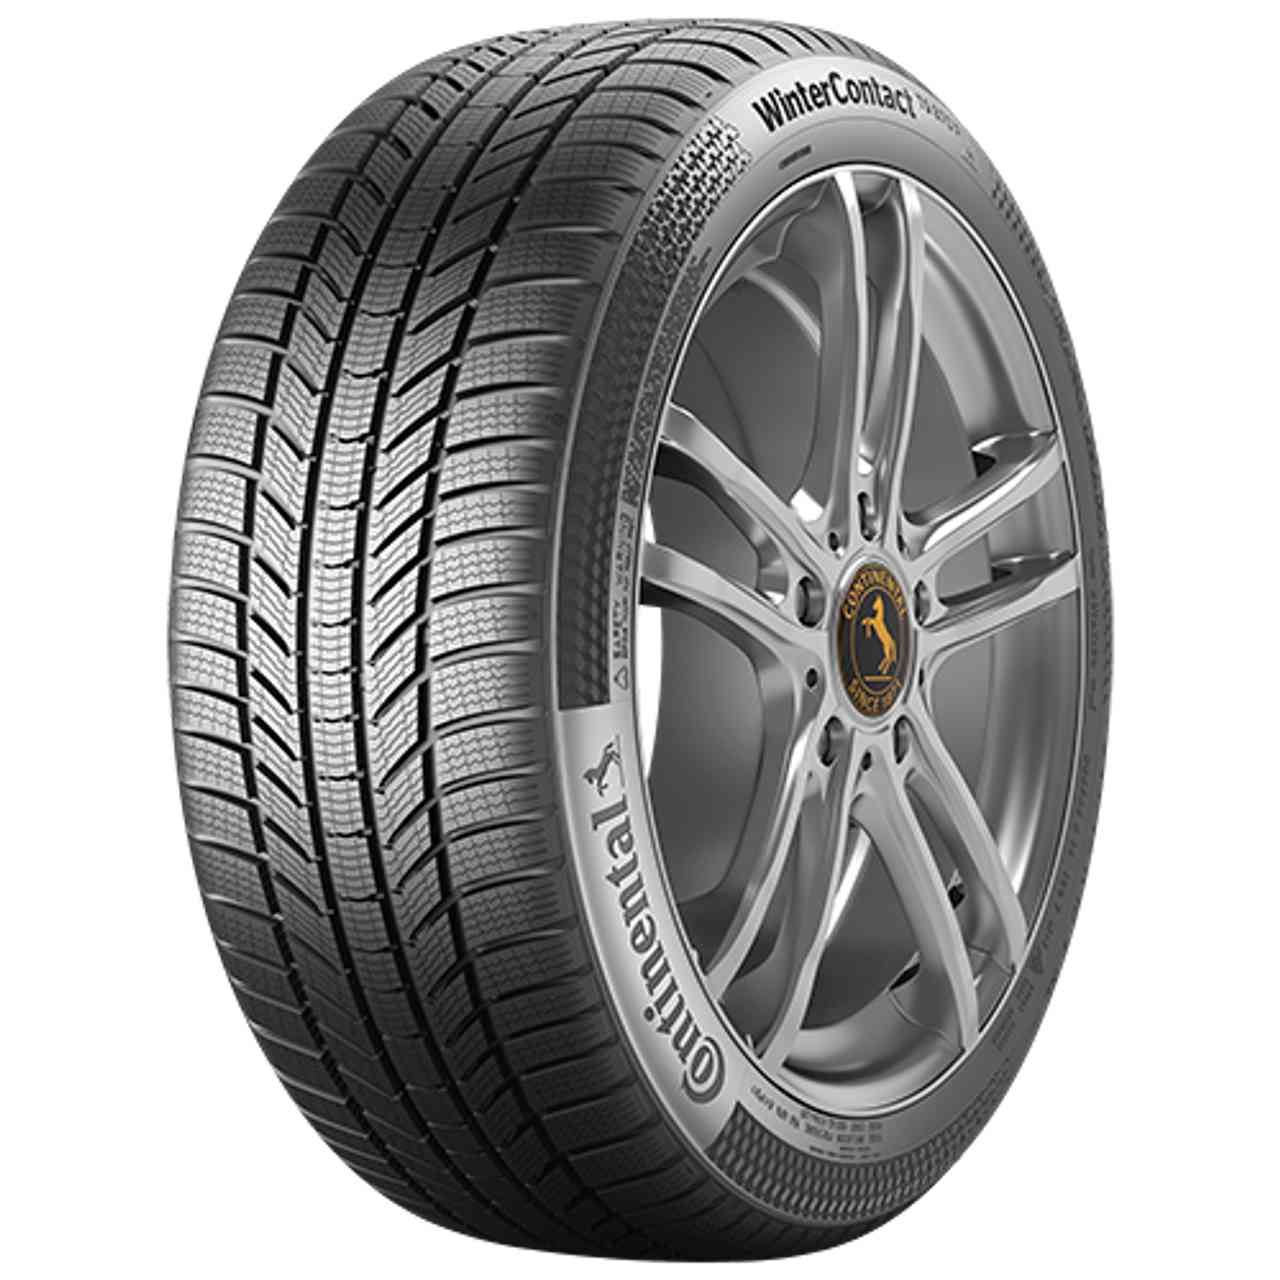 CONTINENTAL WINTERCONTACT TS 870 P (EVc) 225/55R16 99H BSW von Continental